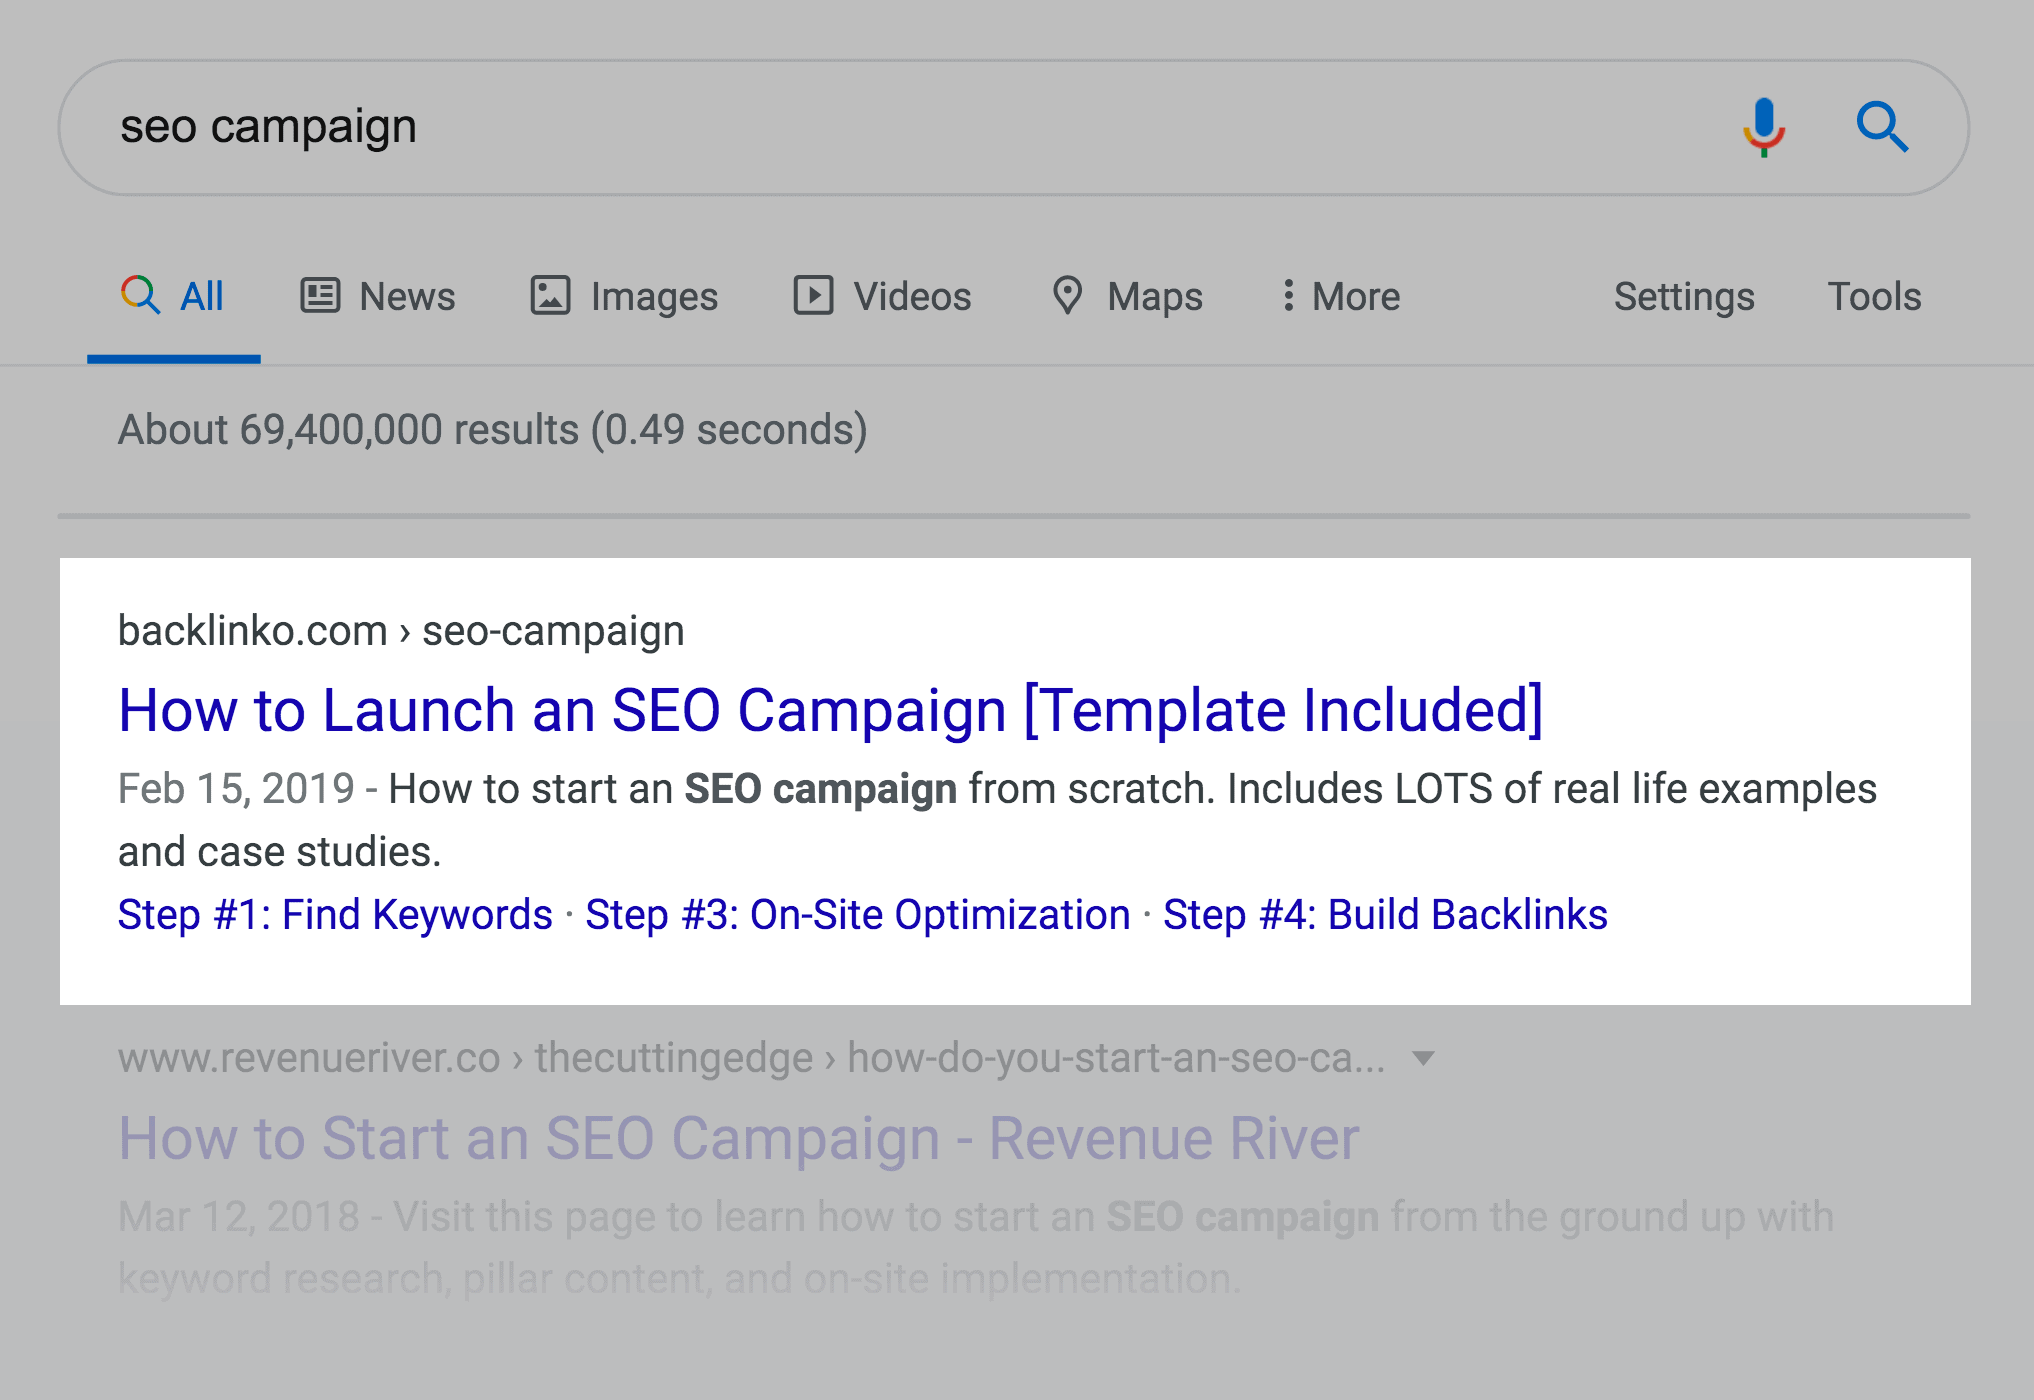 How to Launch an SEO Campaign post in SERPs